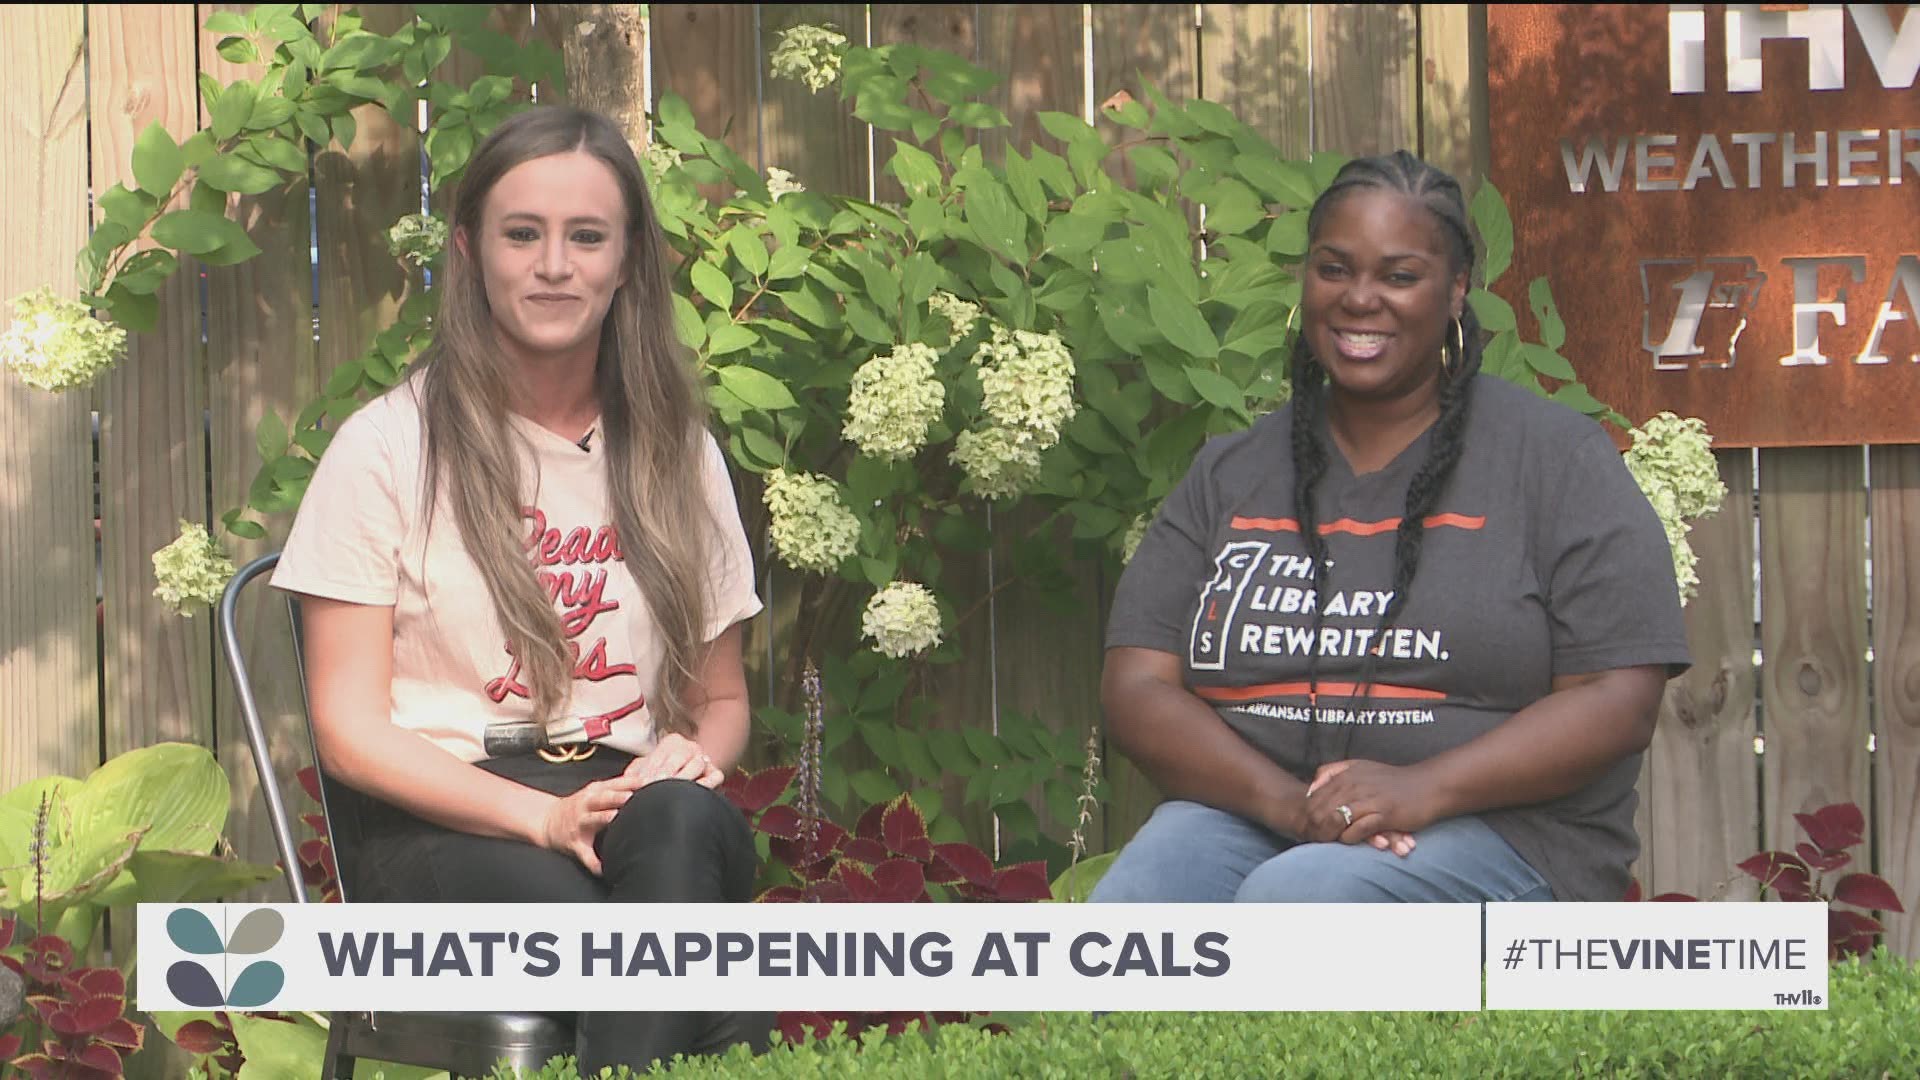 Tameka Lee with the Central Arkansas Library System tells us about Bonus Saturday, where staff will be ready to assist you with your genealogy questions and queries.